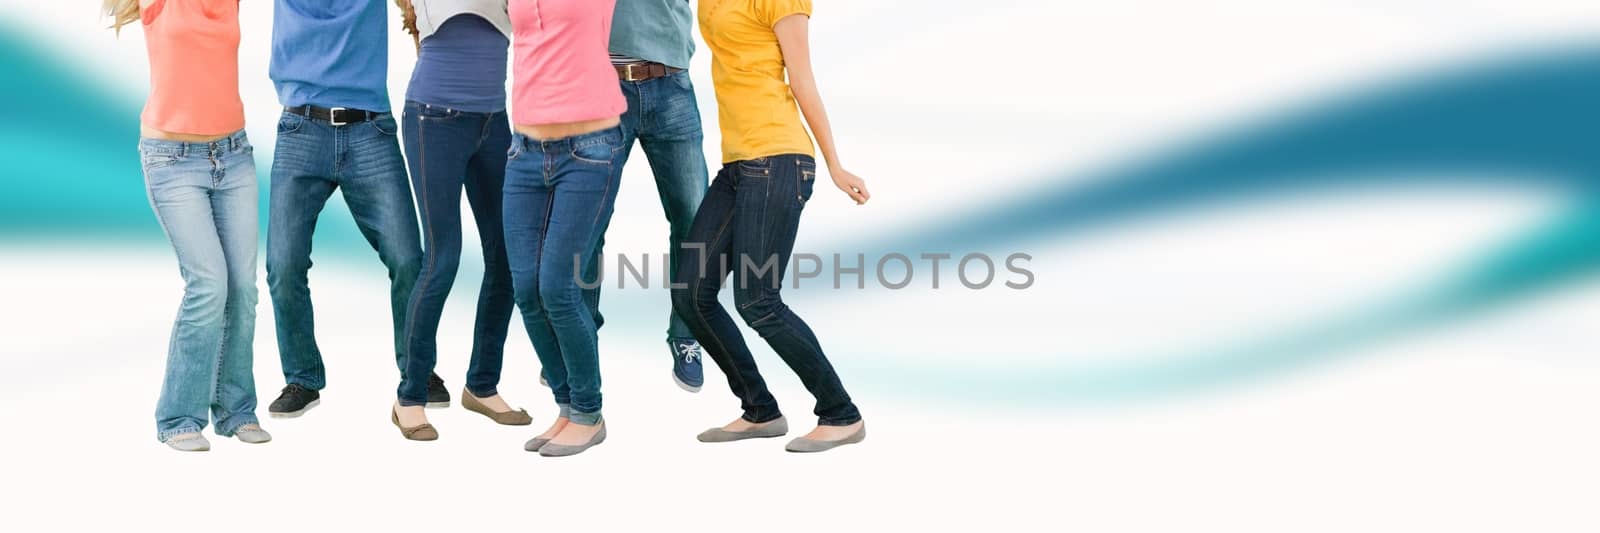 Digital composite of Group of People standing with curved background